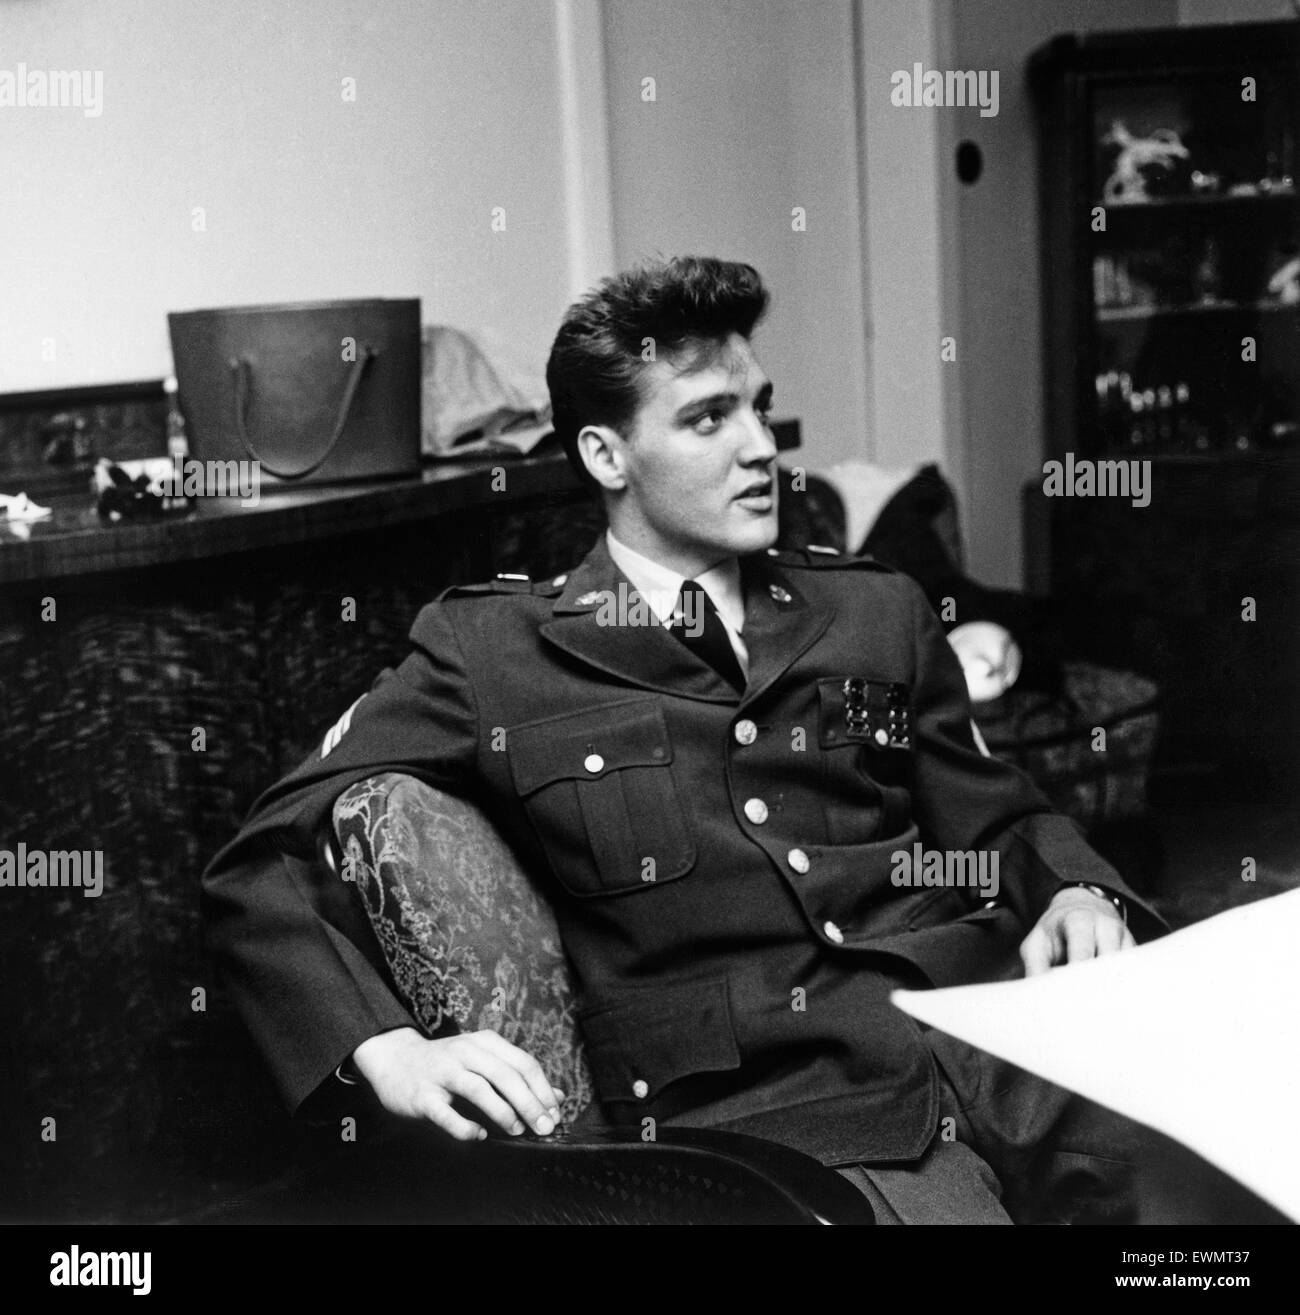 American rock and roll singer and musician Elvis Presley pictured wearing army uniform before attending a press conference in Germany. March 1960. Stock Photo